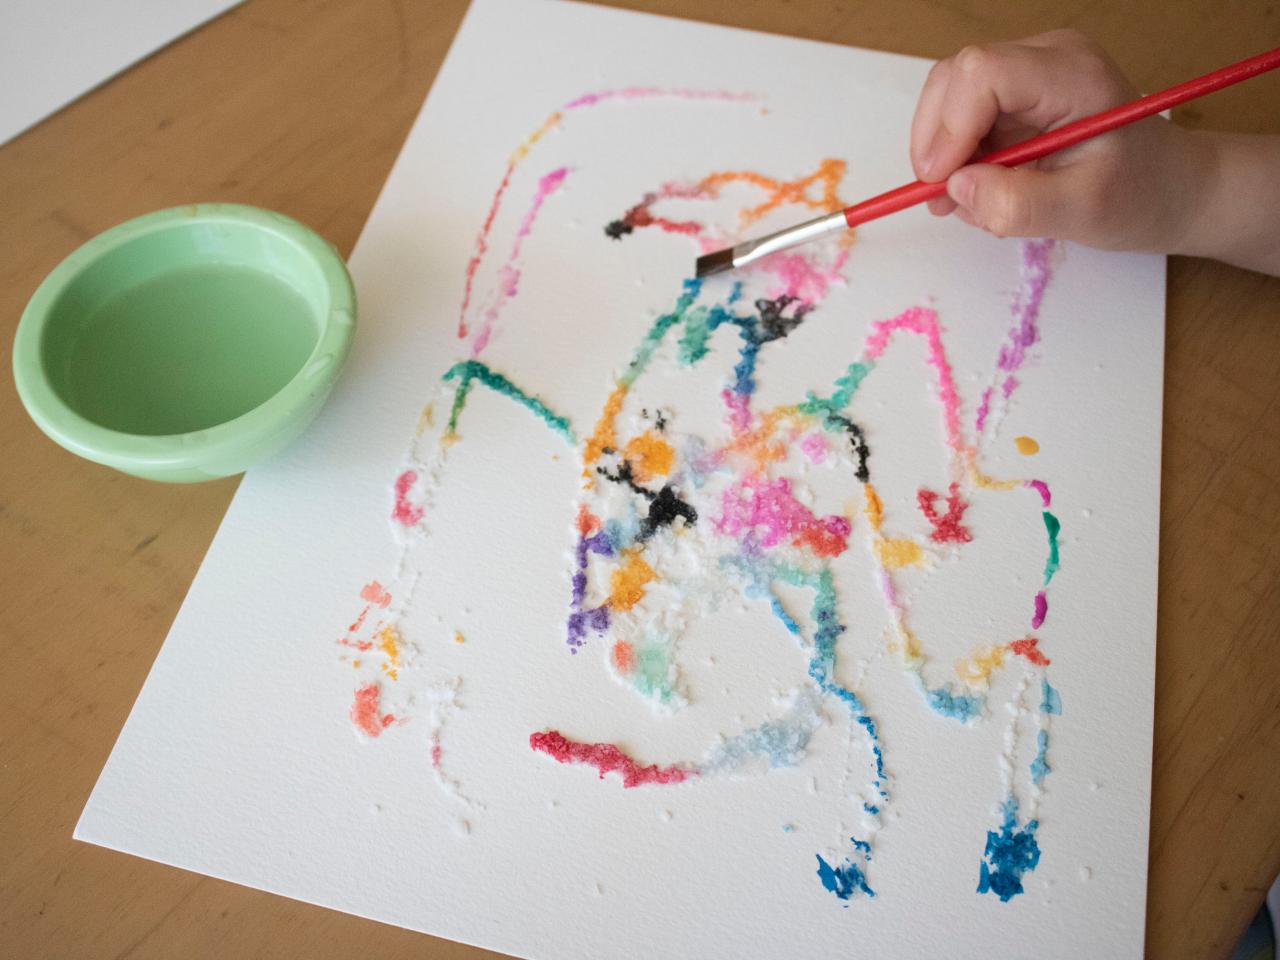 Image Transfer Onto Clay the Easy Way - A Fun Kid-Friendly Project